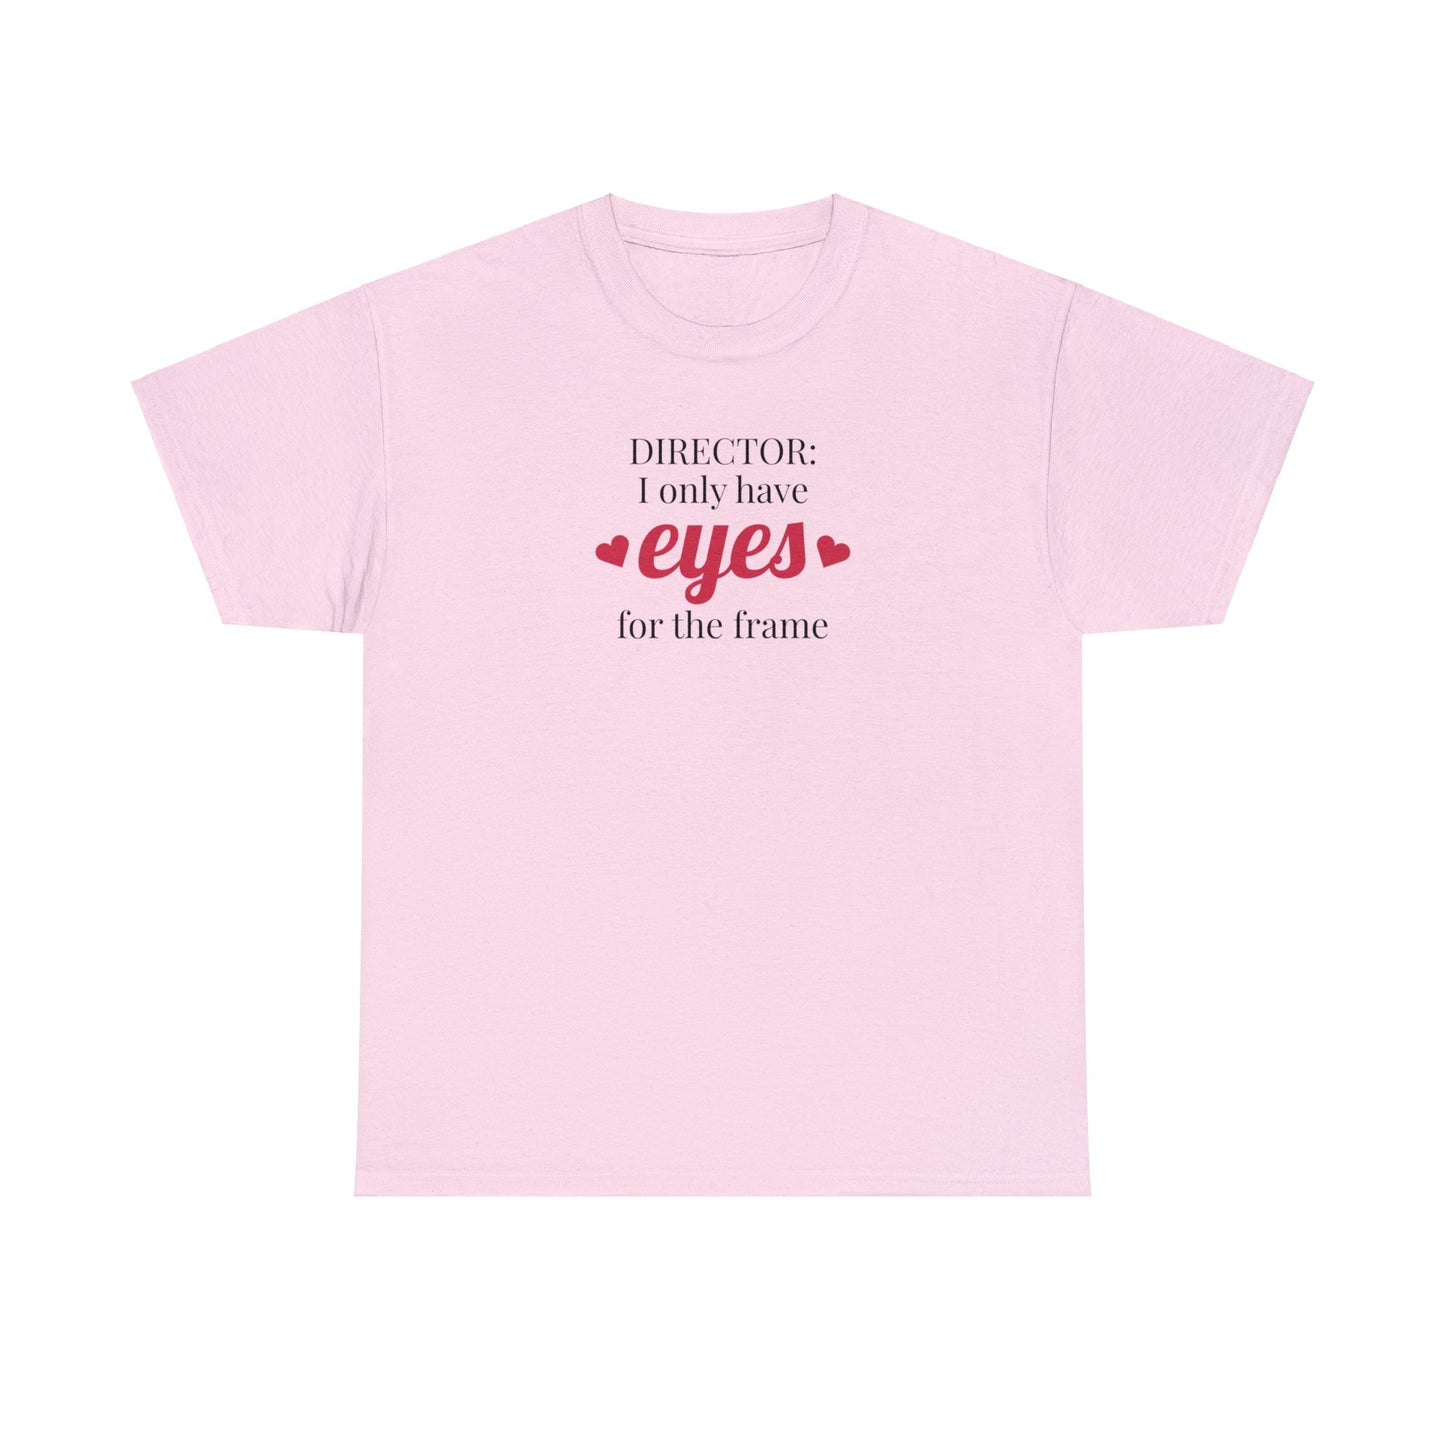 "DIRECTOR: I only have eyes for the frame" t-shirt